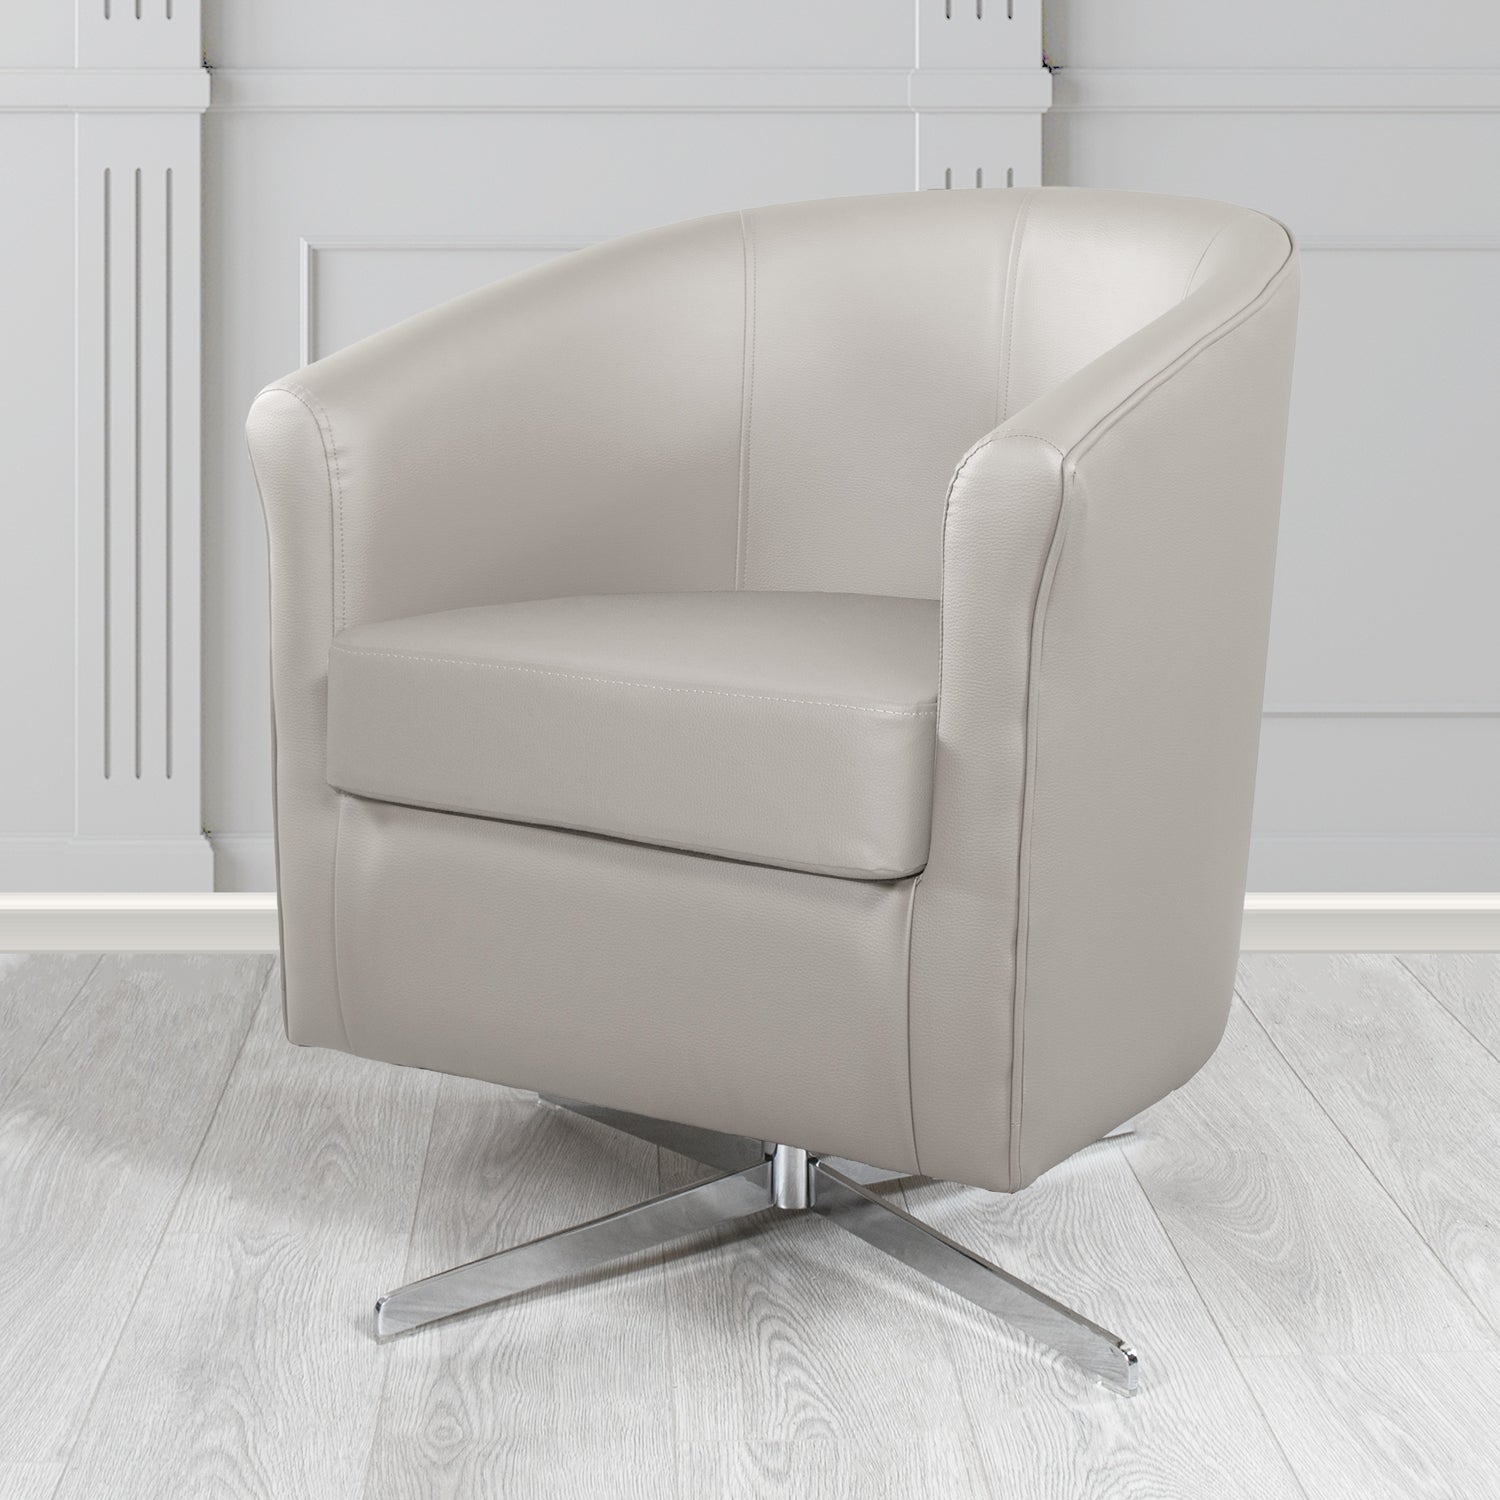 Cannes Swivel Tub Chair in Just Colour Putty Crib 5 Faux Leather - The Tub Chair Shop